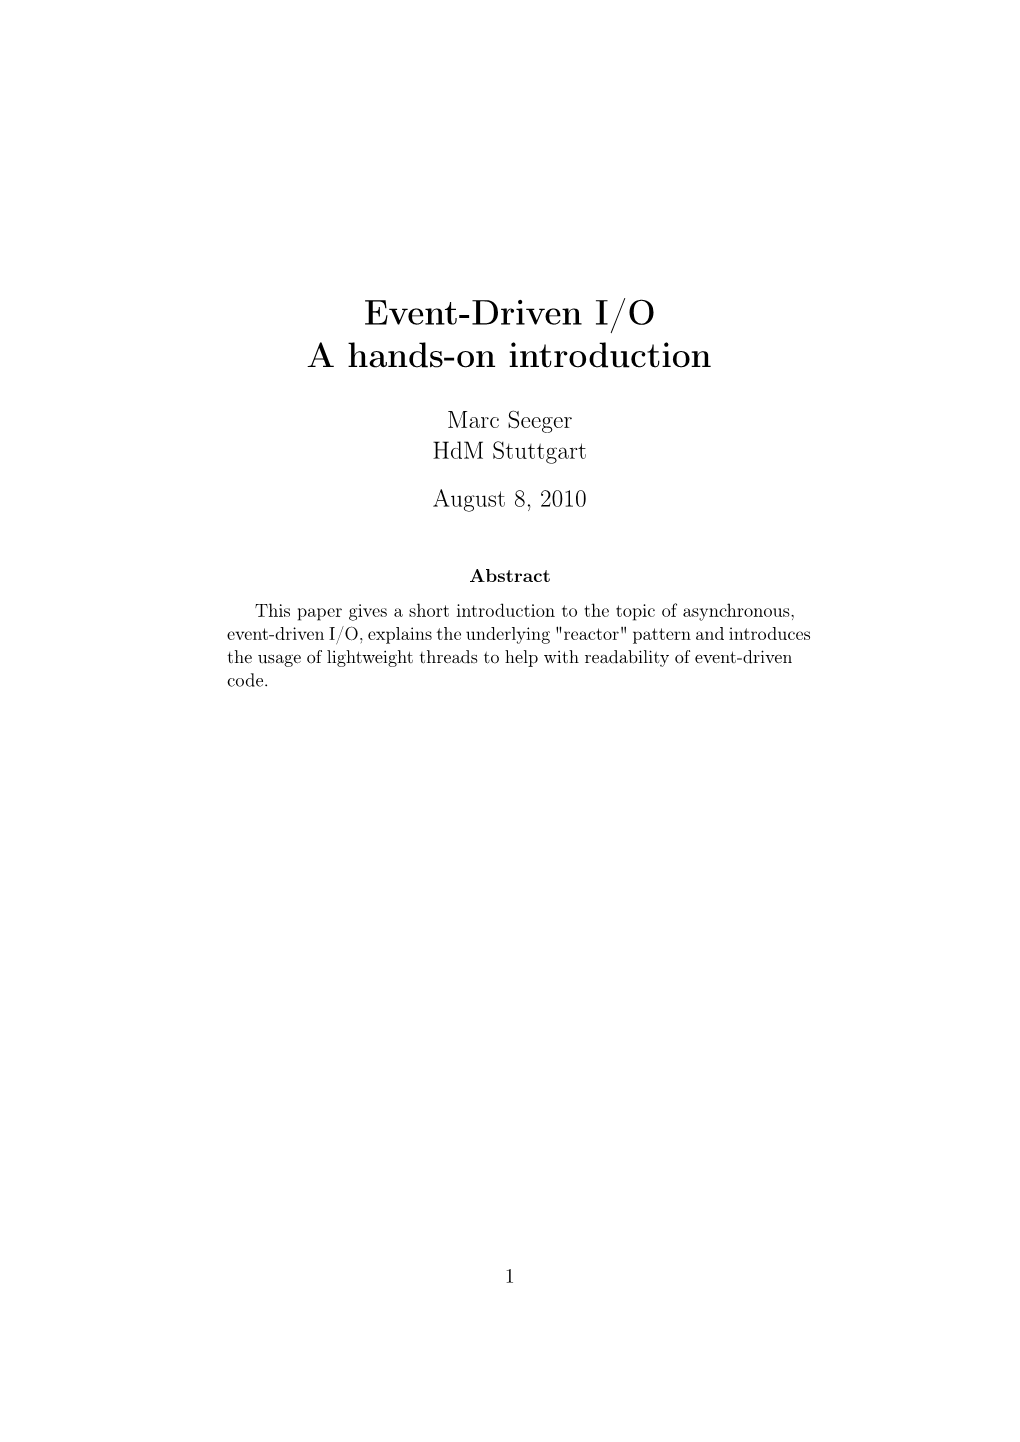 Event-Driven I/O a Hands-On Introduction